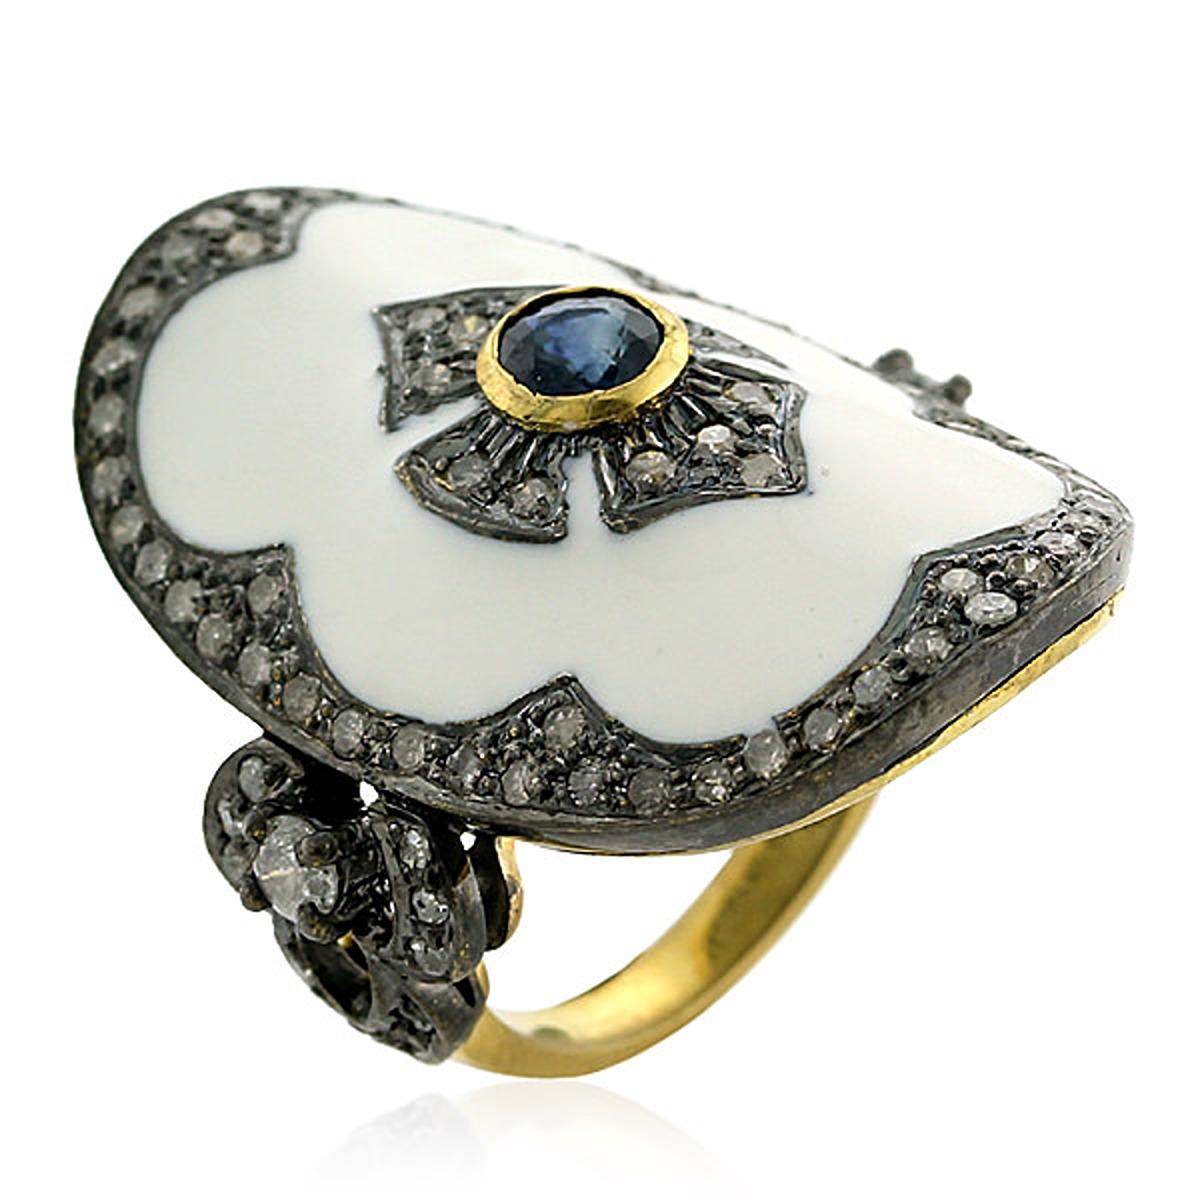 Pave Diamond Enamel Ring With Sapphire Made In 18k Gold & Silver In New Condition For Sale In New York, NY